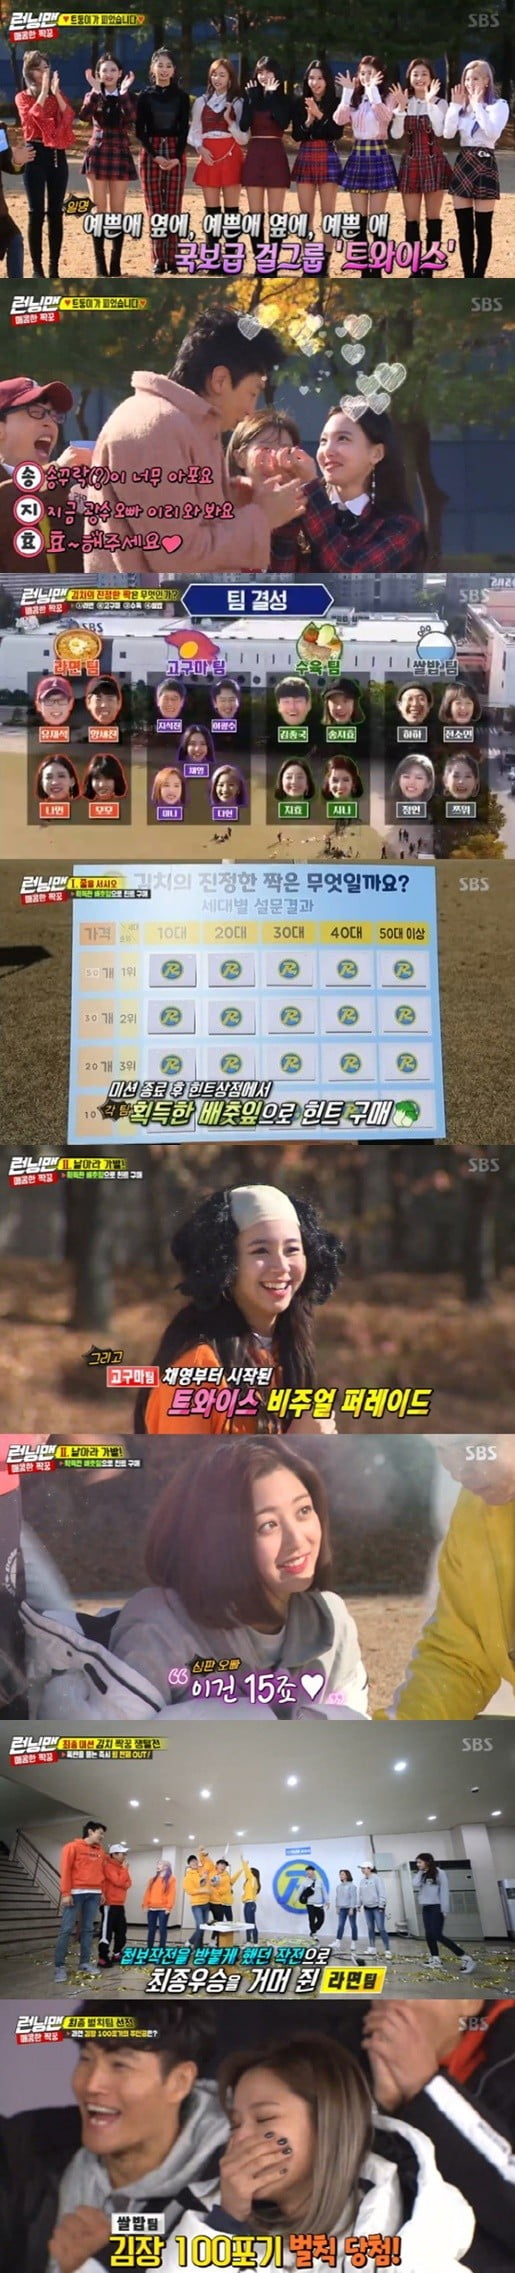 <p>SBS Running Manappeared TWICE with art inspired pulled.</p><p>The last 2 days of the broadcast of Running ManKim of the real mate to find Kim the most distinctive ‘spicy paired peek-a-Boo’ lace decorated in the ‘Running Man’ sister group TWICE home and by members of the acclaimed shorter.</p><p>This race is a team competition with a as long as Instant noodle team Yoo Jae-Suk, Yang and more as well, Momo, I smoke, and every team in the Suk Jin, Lee Kwang-soo, Chae, Mina, Implementation, Training, Team Kim Jong Kook, Song JI Hyo,, Hyo, Rice team in that one, small, square, Richardson sub divided into.</p><p>Each team has a ‘line’ through the game fierce confrontation unfolded, Instant noodle team, the academic team, and each team, each 1 win by handing out the hints acquired, and Round 2 of the ‘fly! The wig-switching in the potato team and Instant noodle team # 1, # 2, or once the hint is acquired.</p><p>The last final round that the menu is attached to the name tag off of the menu when you exchange, while a bomb attached to the name tags off team the power is out, and the menu until the opponent beyond the ‘Star race’began.</p><p>Ago min is Lee Kwang-soos name tag off, but Lee Kwang-soo is a bomb, this Rice team is the power being out face.</p><p>Water and water our father, and our exchange rate on the Instant noodle team info to start up, expand, and ‘kimchis true even’exclaim the headquarters seat and headed towards, training, team support available is Instant noodle team or the name of the tag to off when you want to or “Instant noodle”, and shout victory.</p><p>Great 100 give Driving Cycle penalty for the uncle in the game Rice team of the square ‘shit son’, born and penalties in winning was and this scene is up to 8. 8%jump in the ‘best 1 minute’.</p>